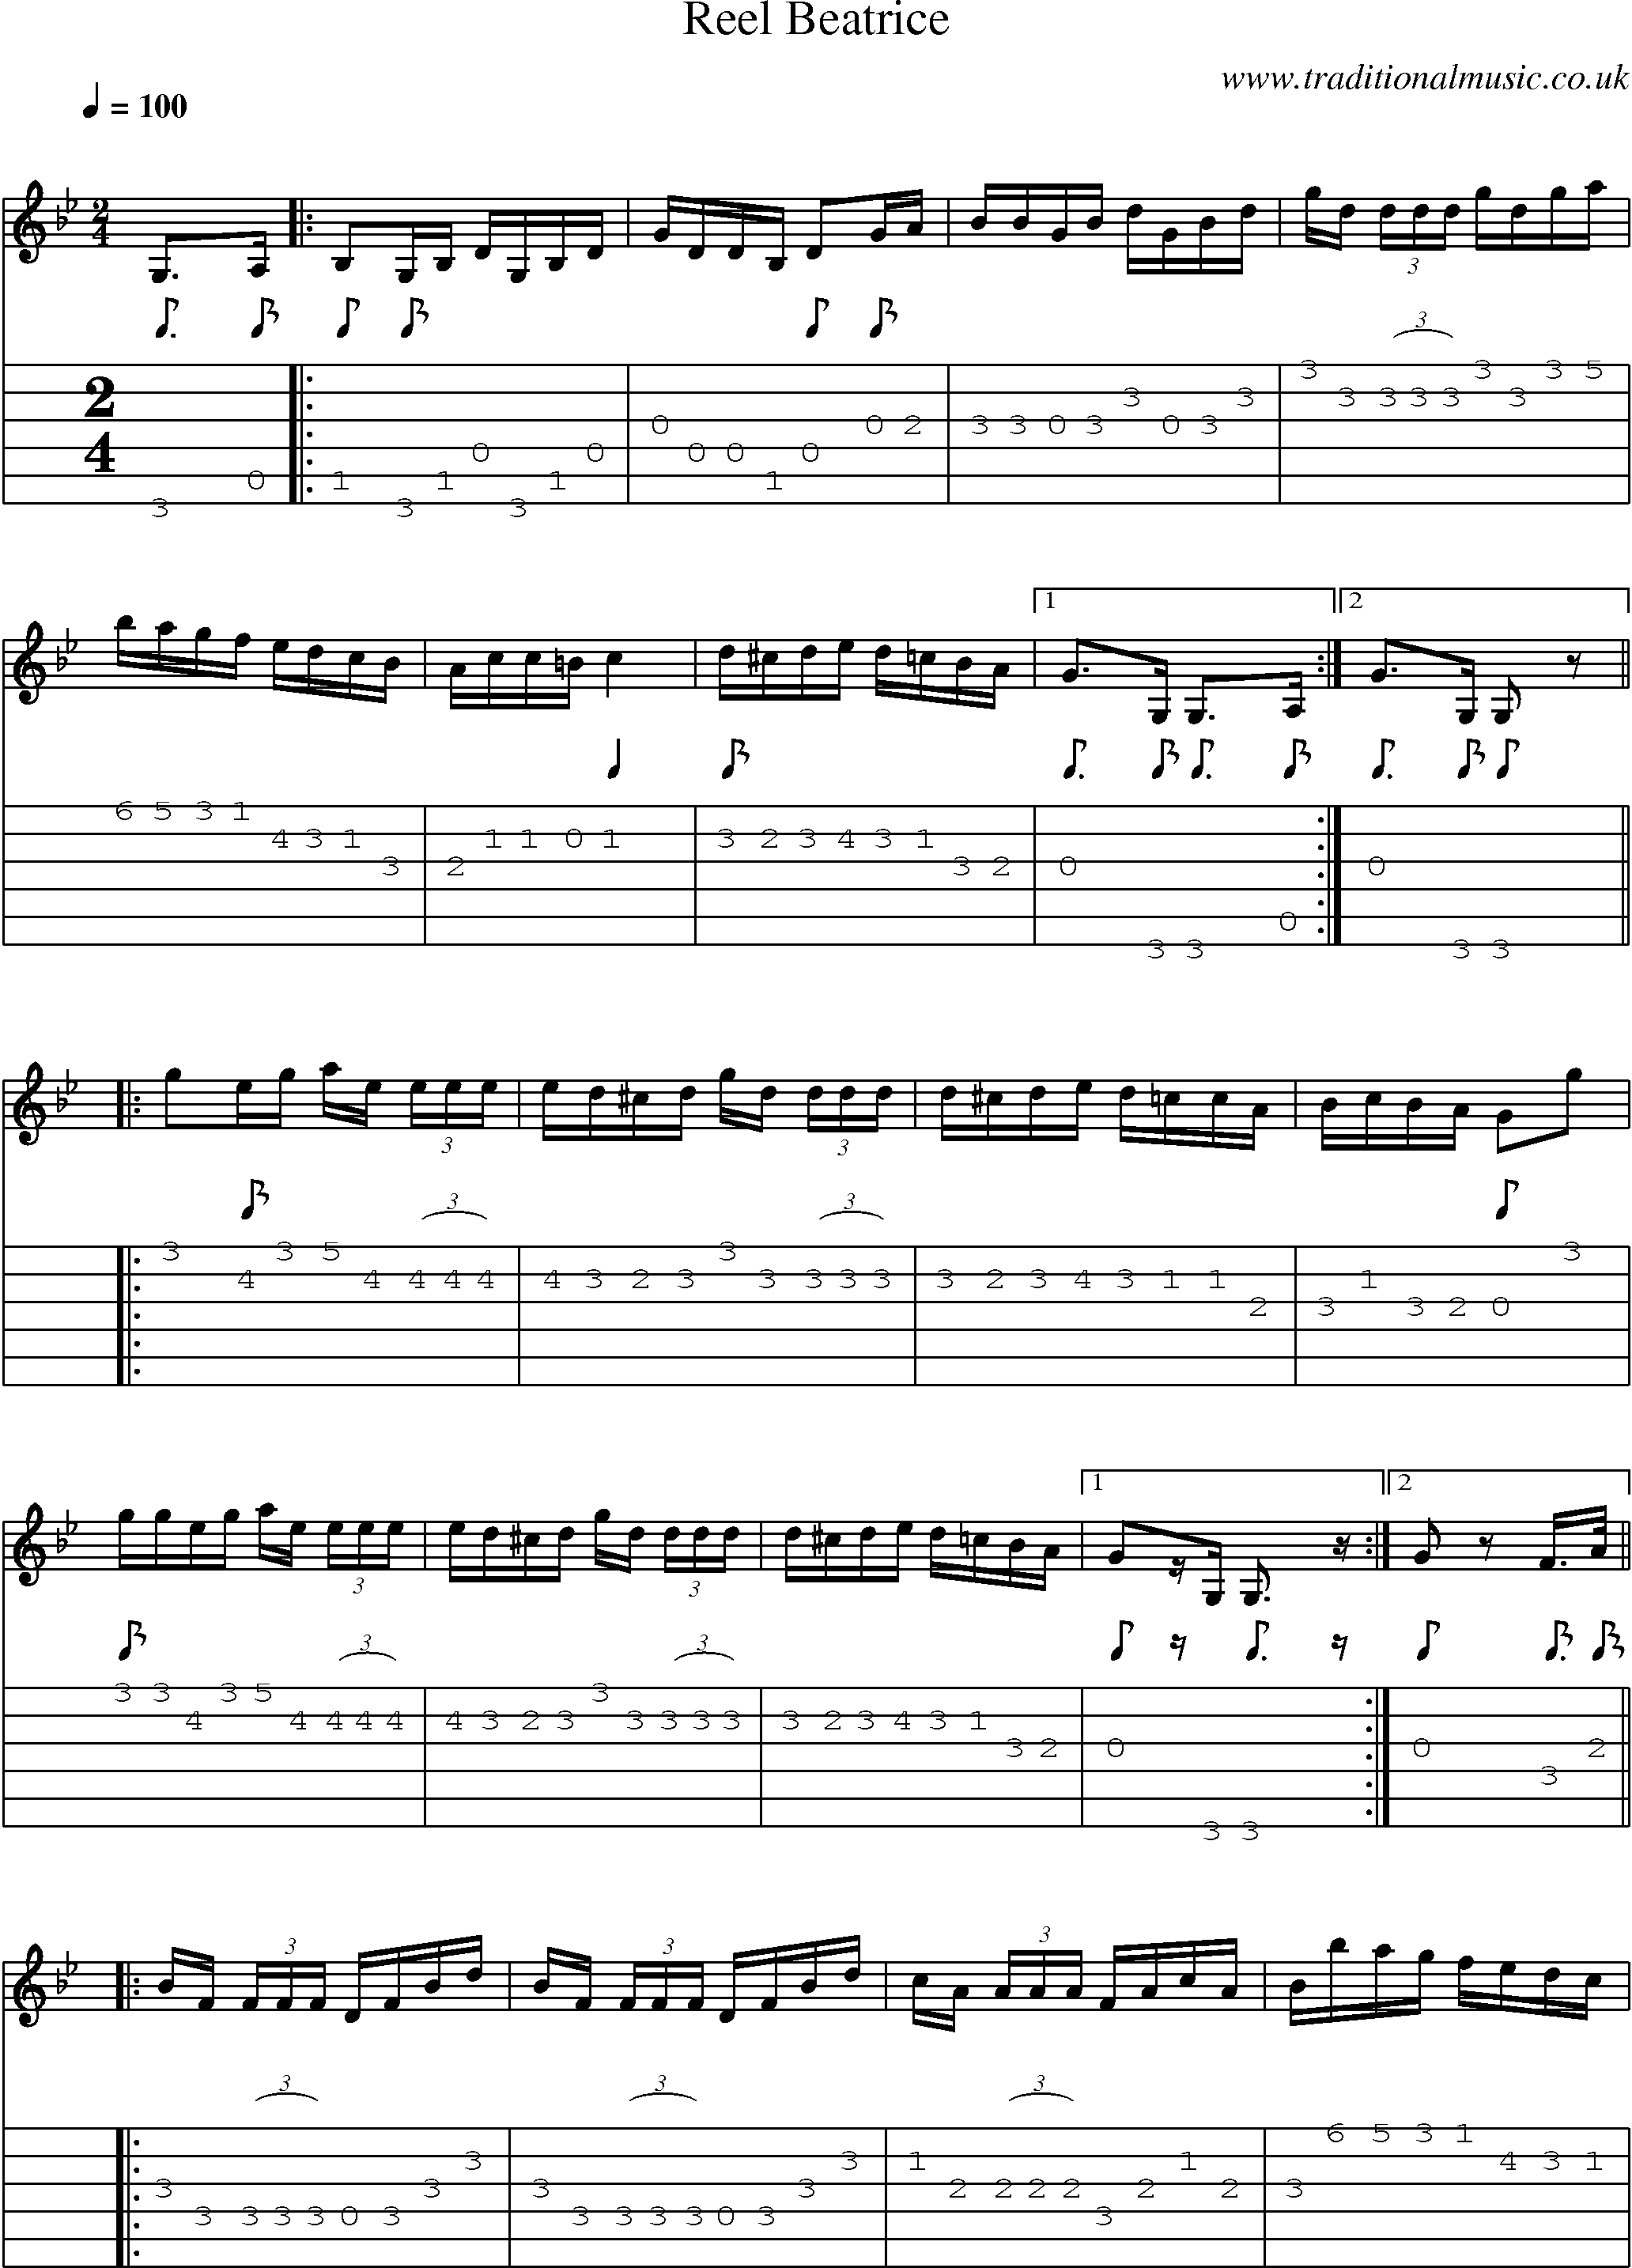 Music Score and Guitar Tabs for Reel Beatrice